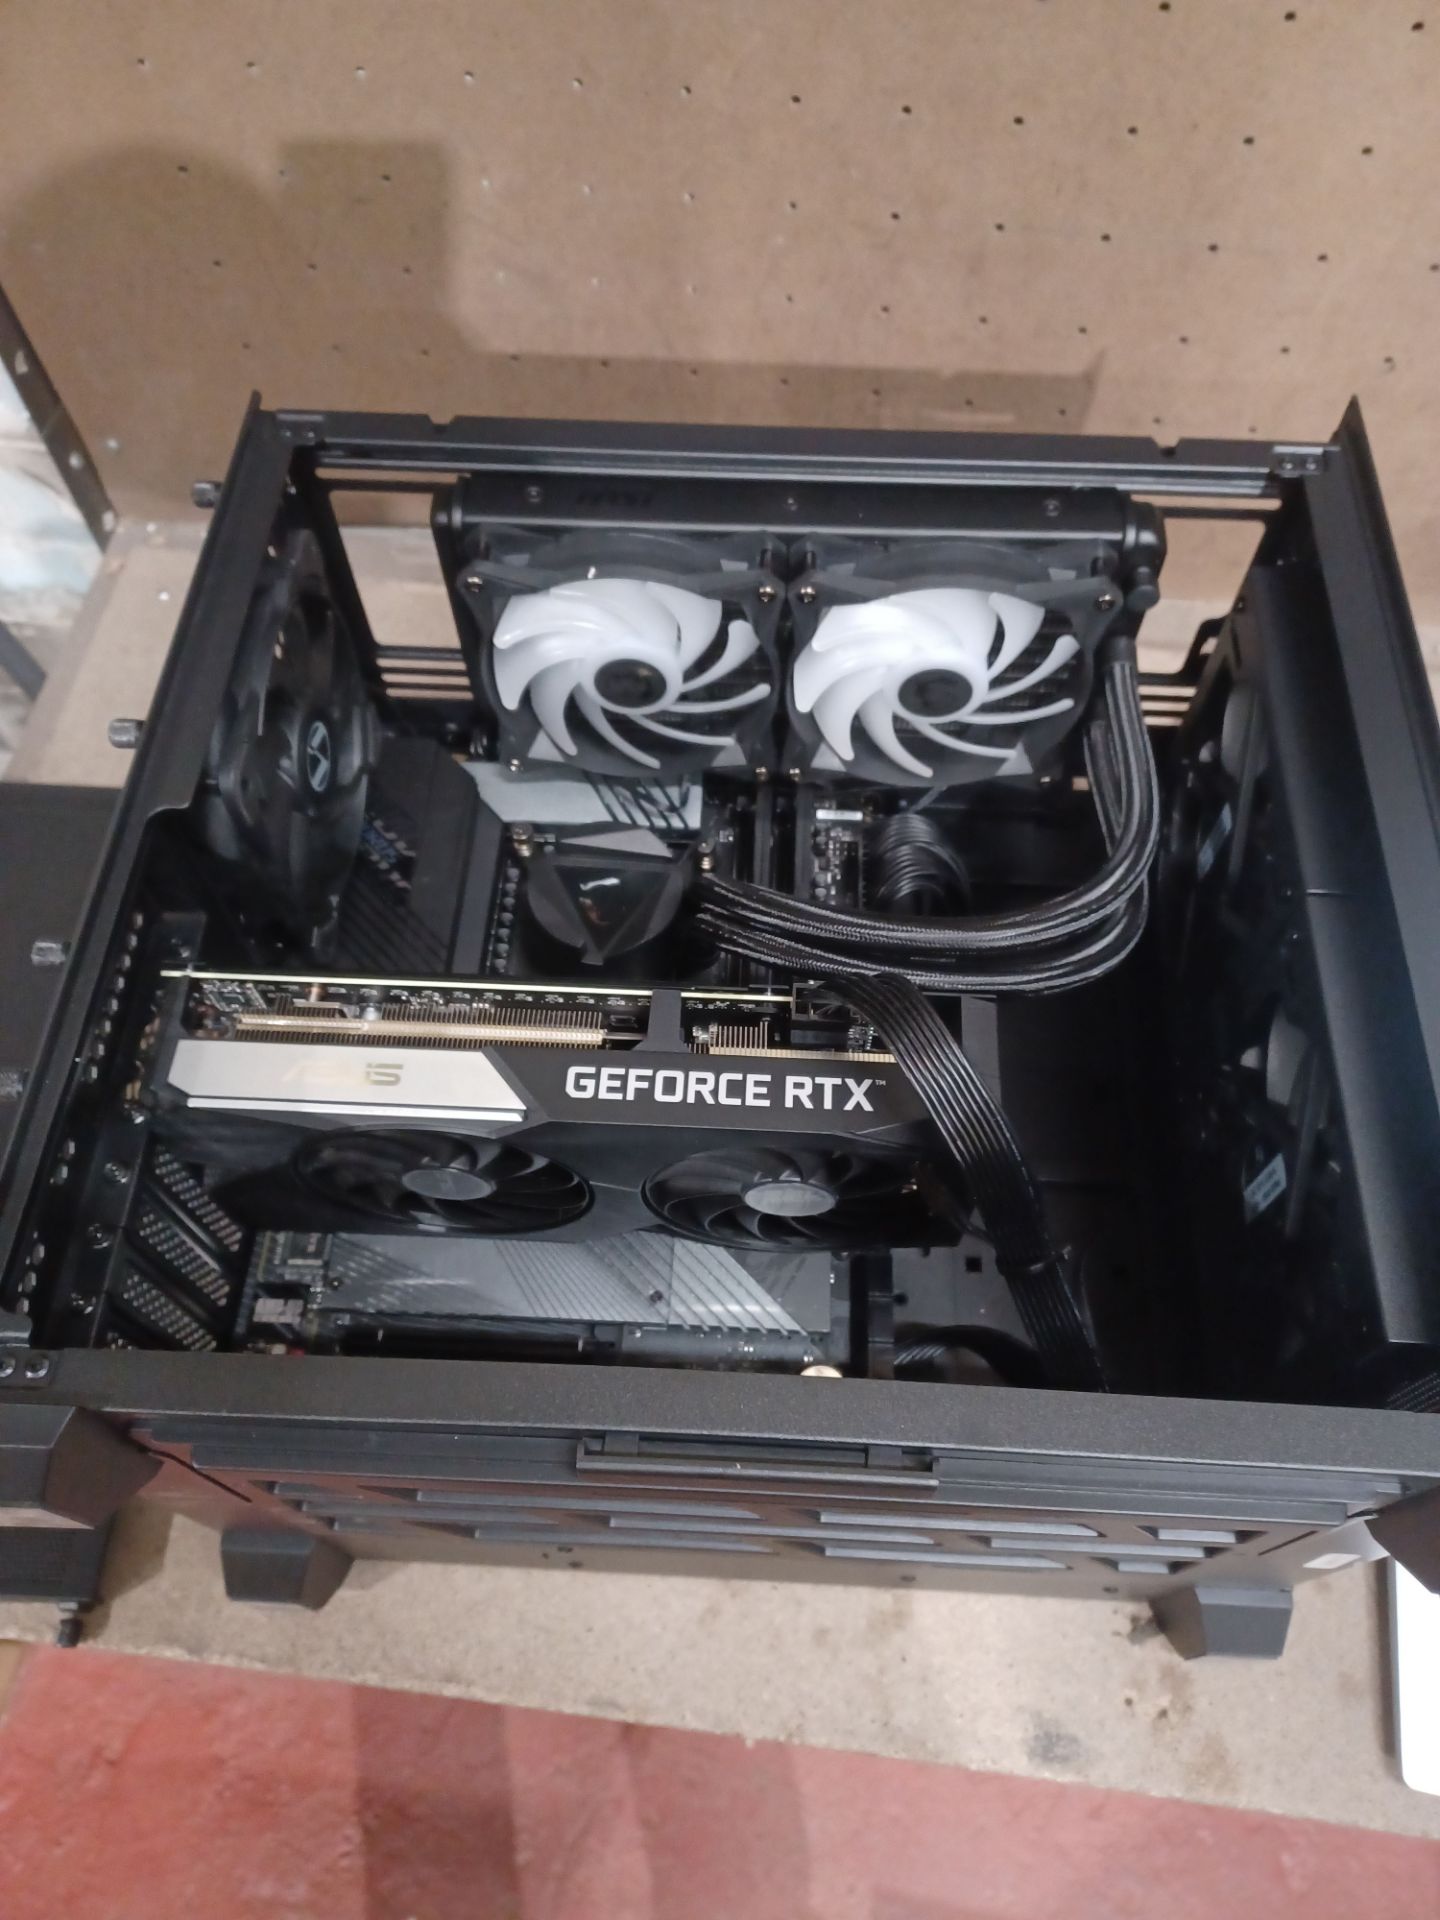 Custom Built PC Cube Gaming Case Asus GeForce RTX Dual RTX 3060TI-O8G Graphics Card Vengeance DDR5 - Image 3 of 4